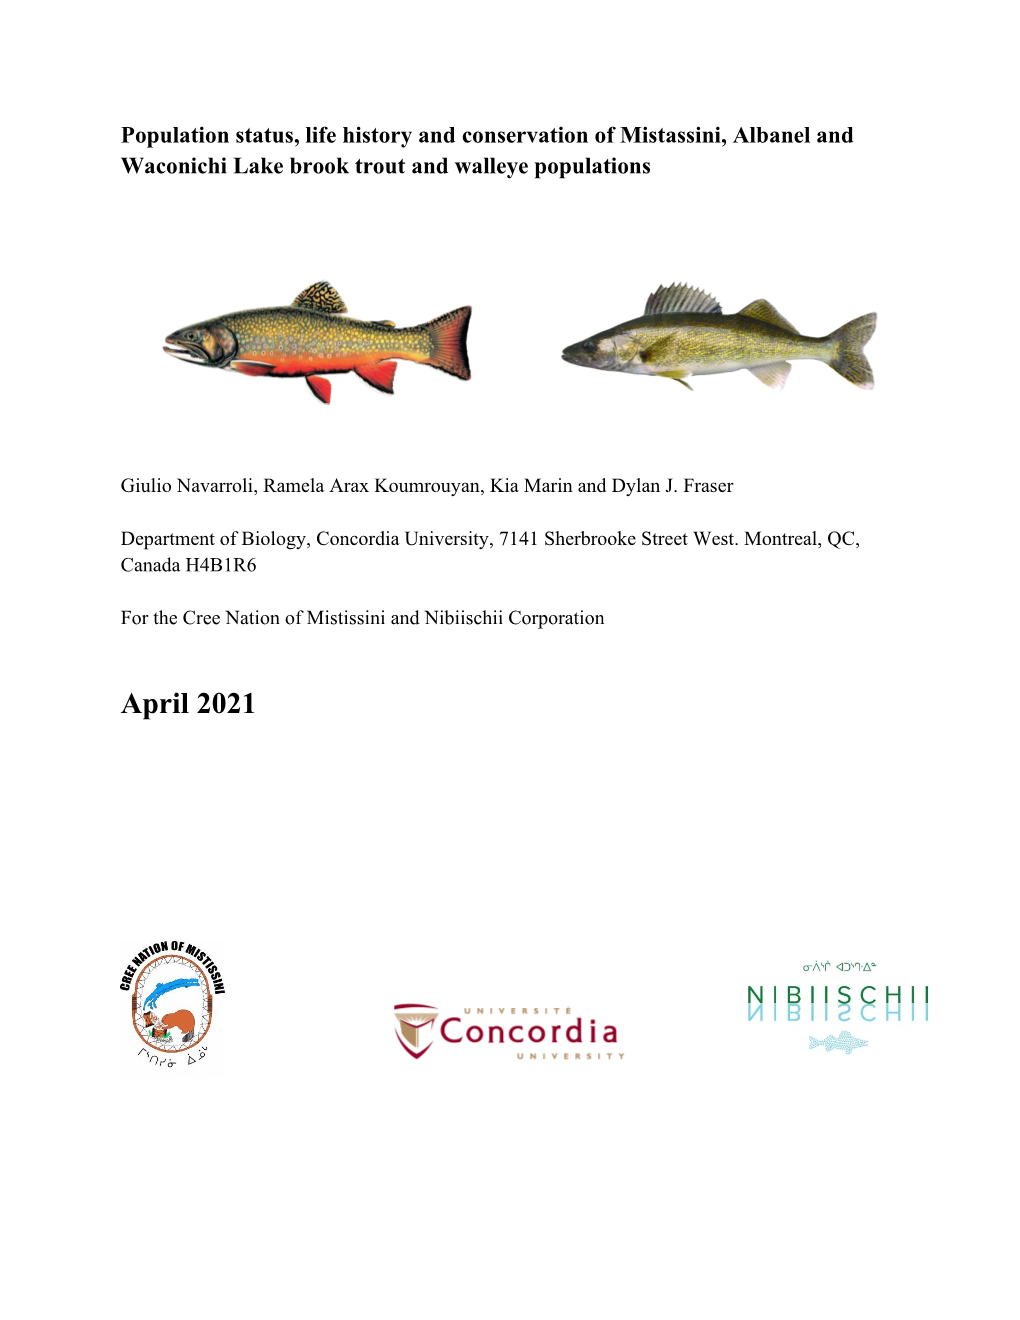 Population Status, Life History and Conservation of Mistassini, Albanel and Waconichi Lake Brook Trout and Walleye Populations